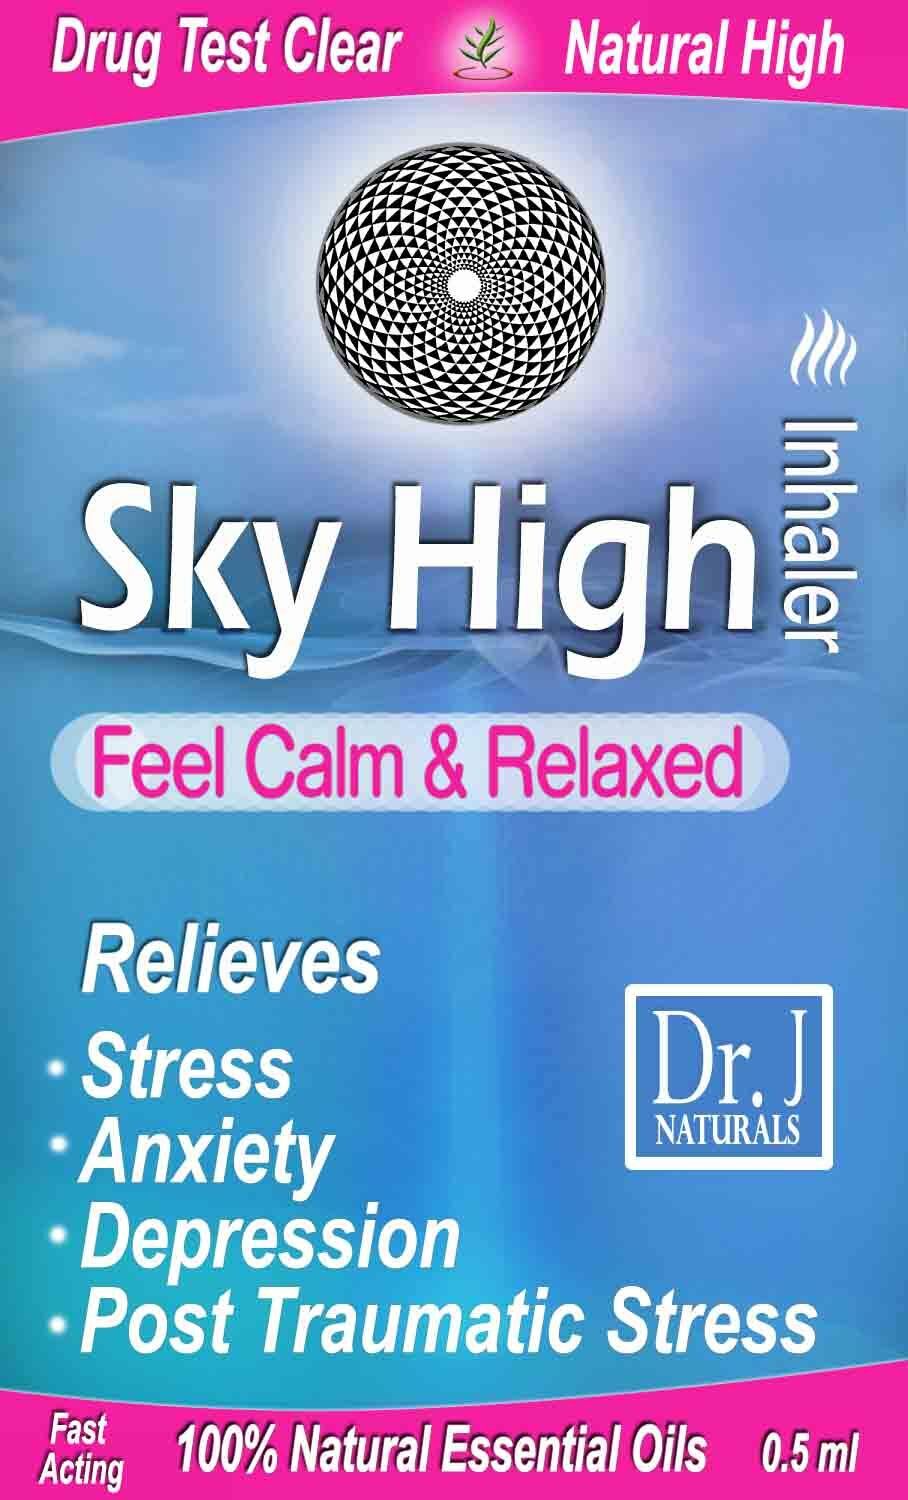 Depression, Ptsd, Stress, Headache And Anxiety Relief. Fast Acting All Natural